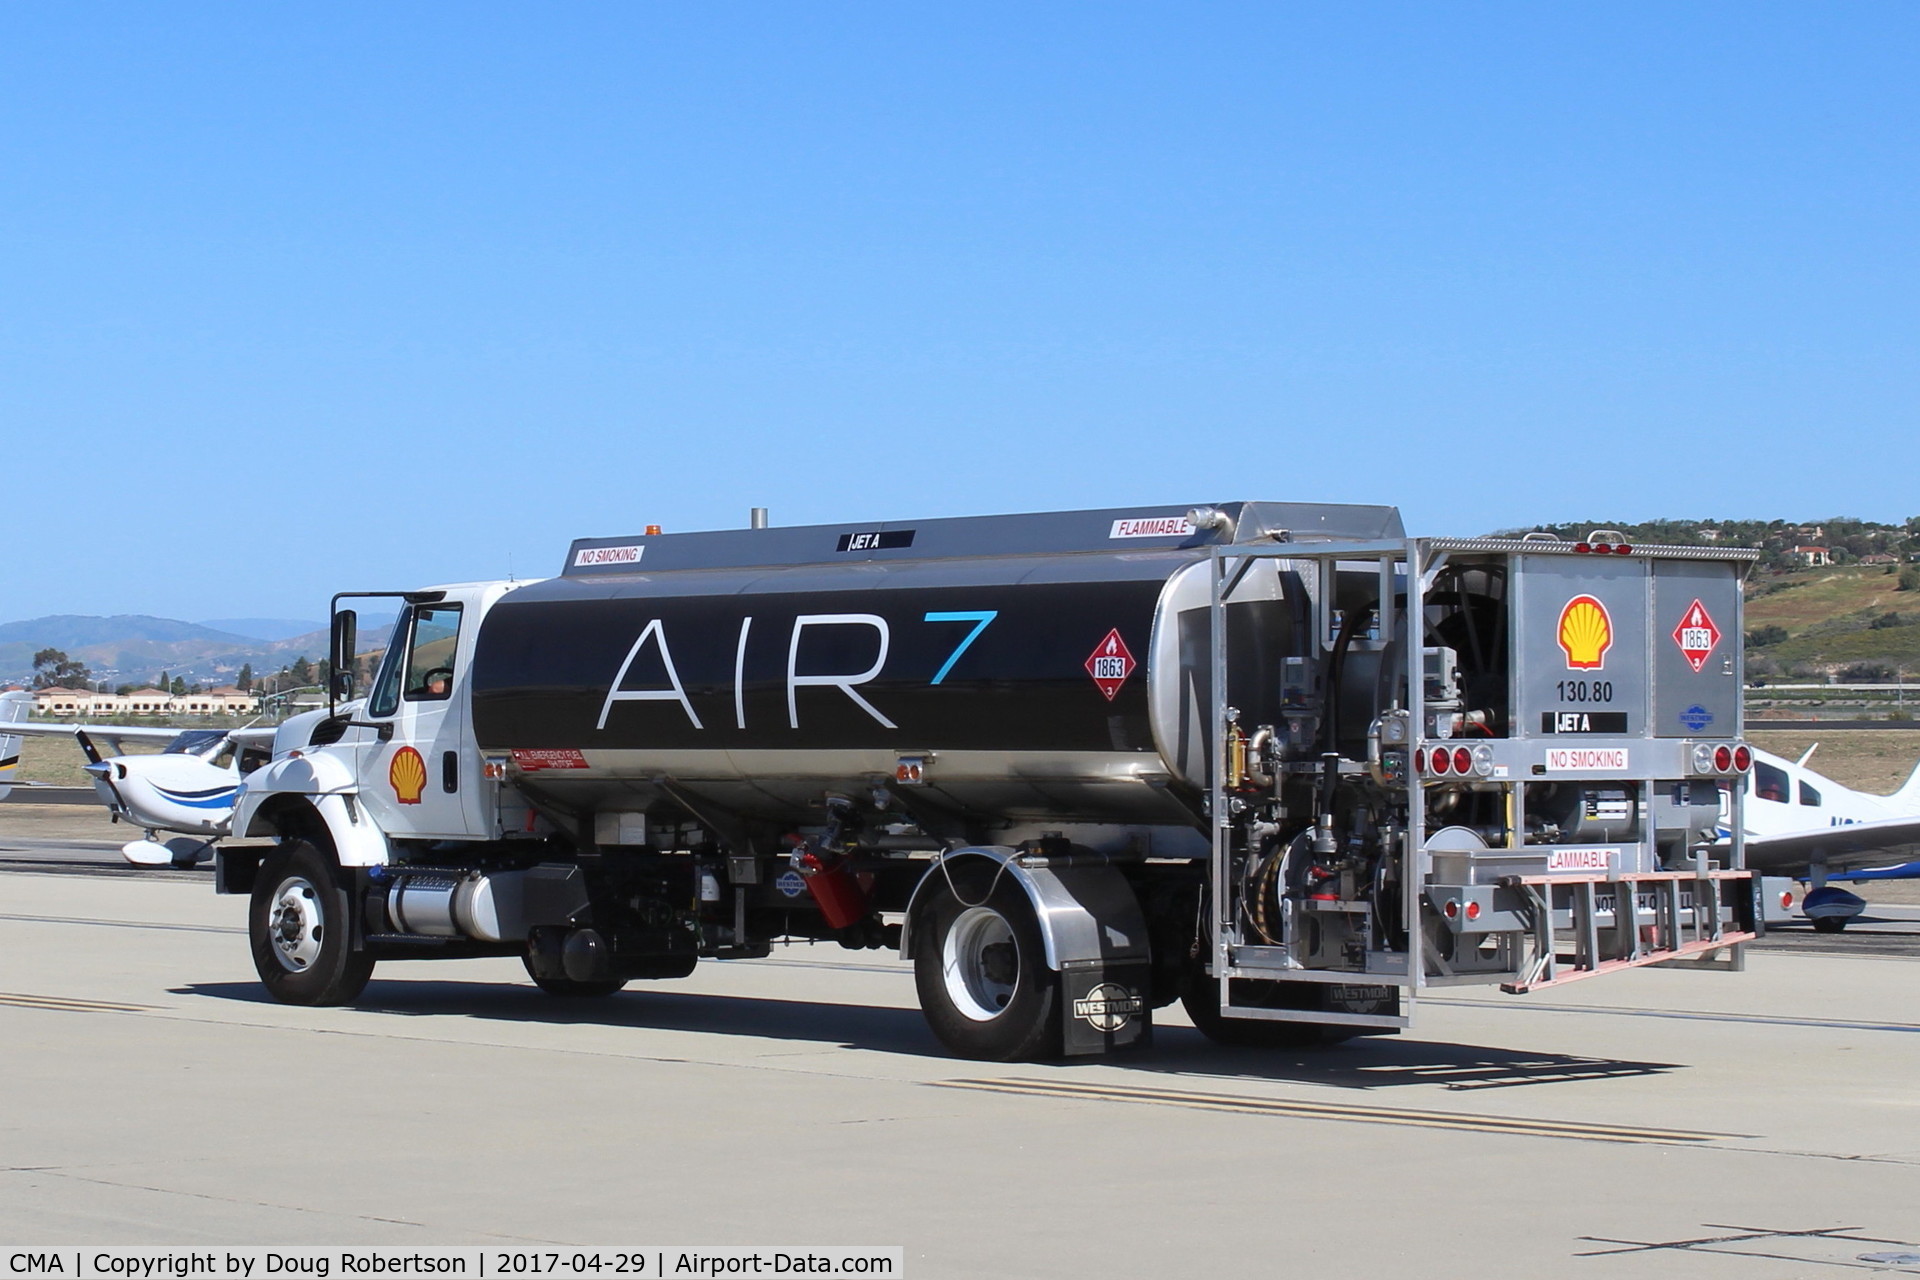 Camarillo Airport (CMA) - AIR7 Fueler- SHELL AVIATION 130, 80, JET-A, keeping busy with the crowd at AOPA-FLY-IN. CMA has multiple fuel sources including self-serve near the Tower. 